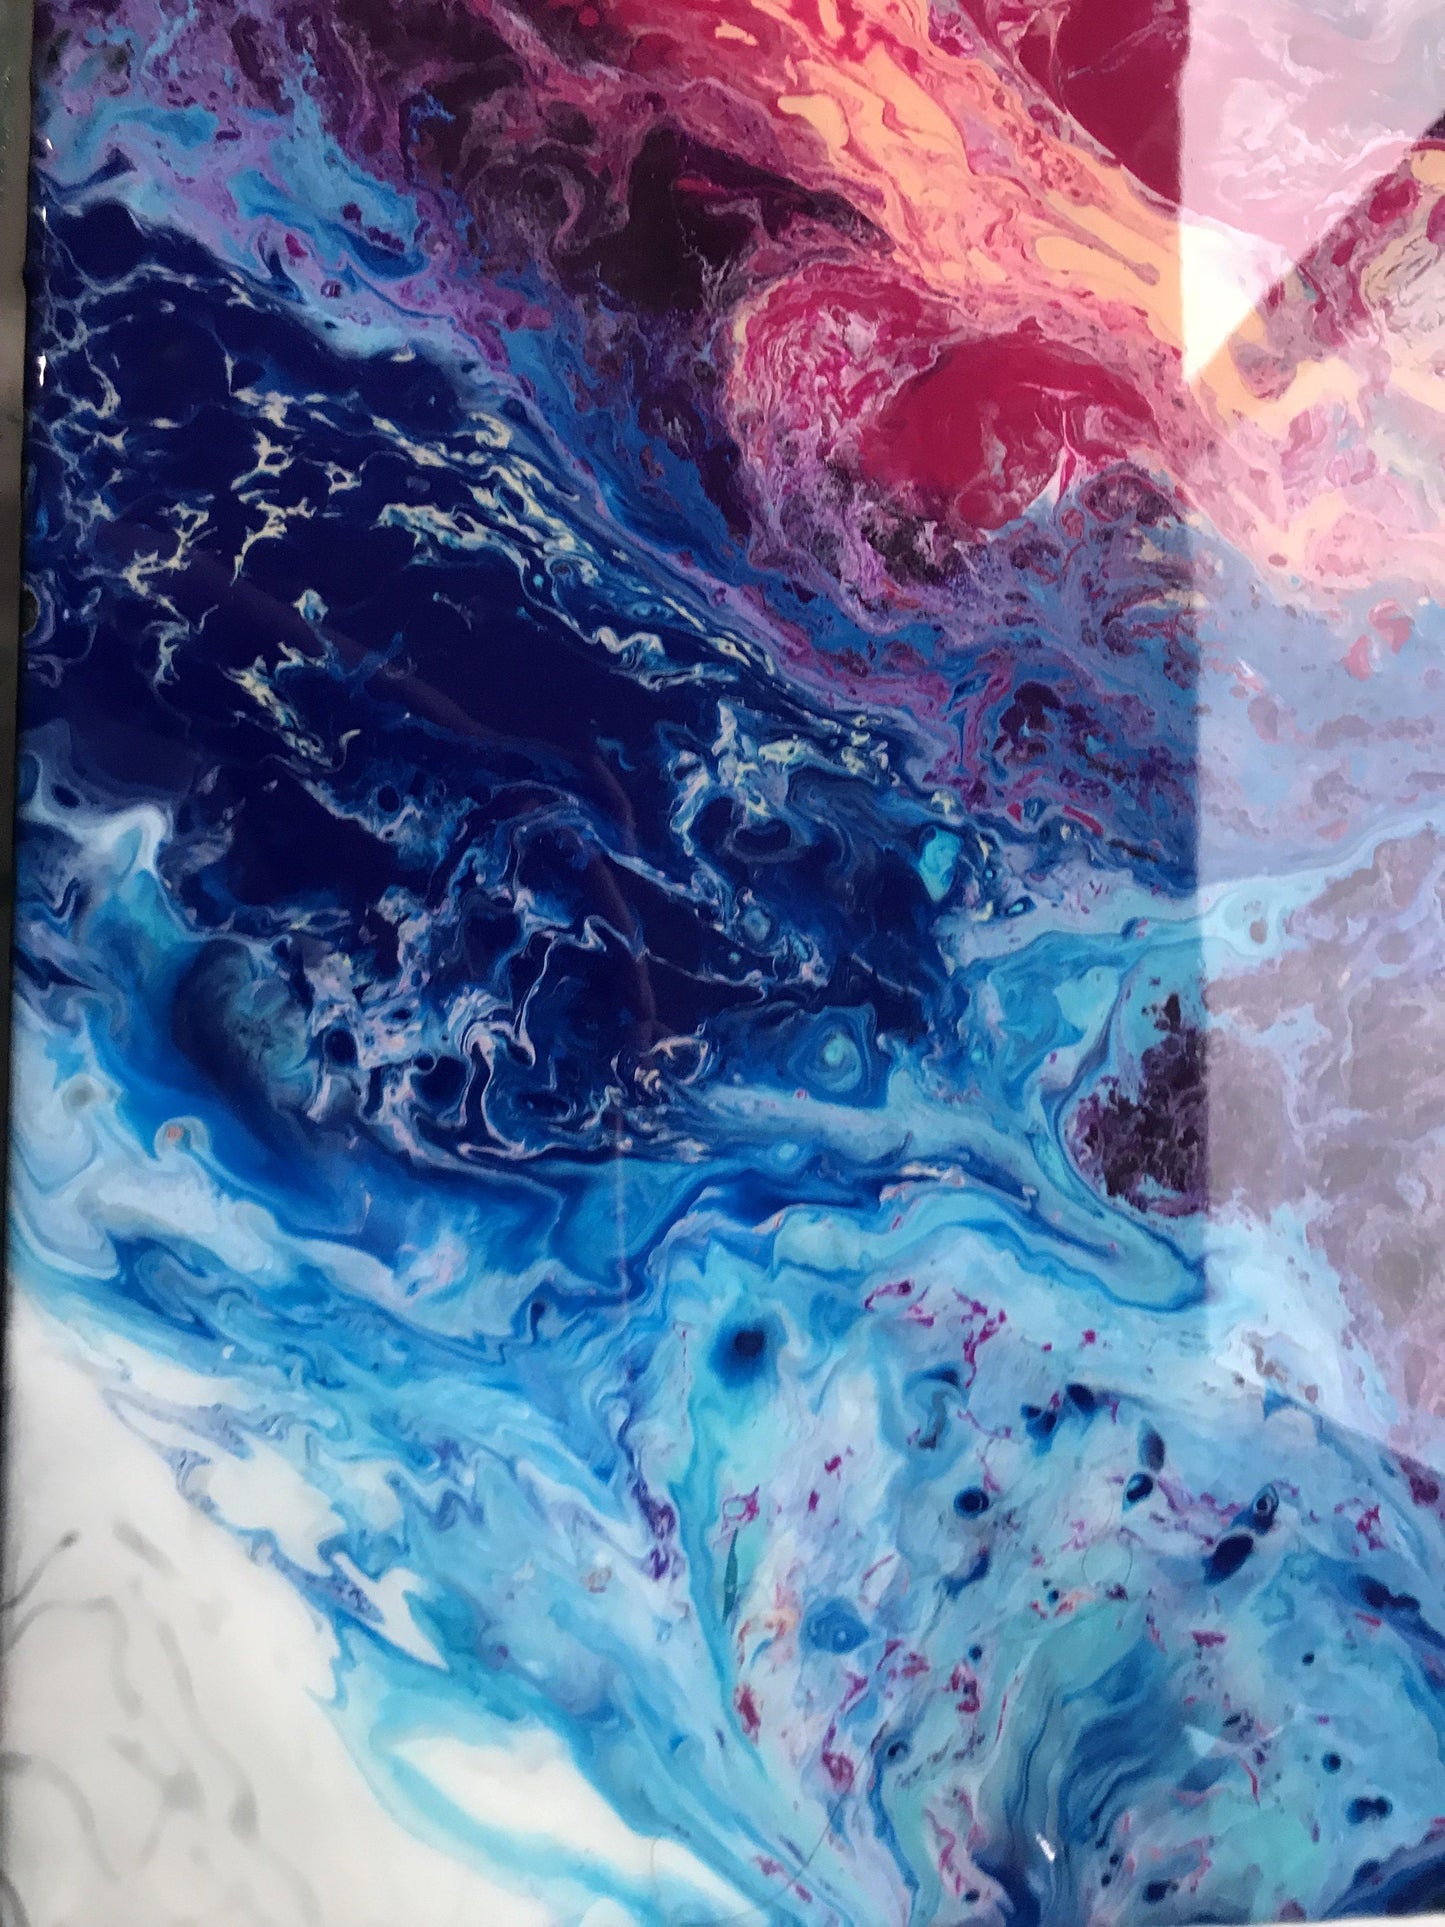 Fluid Art Original Acrylic Painting with Resin in Blue, Magenta and White. Glossy Brilliant Finish